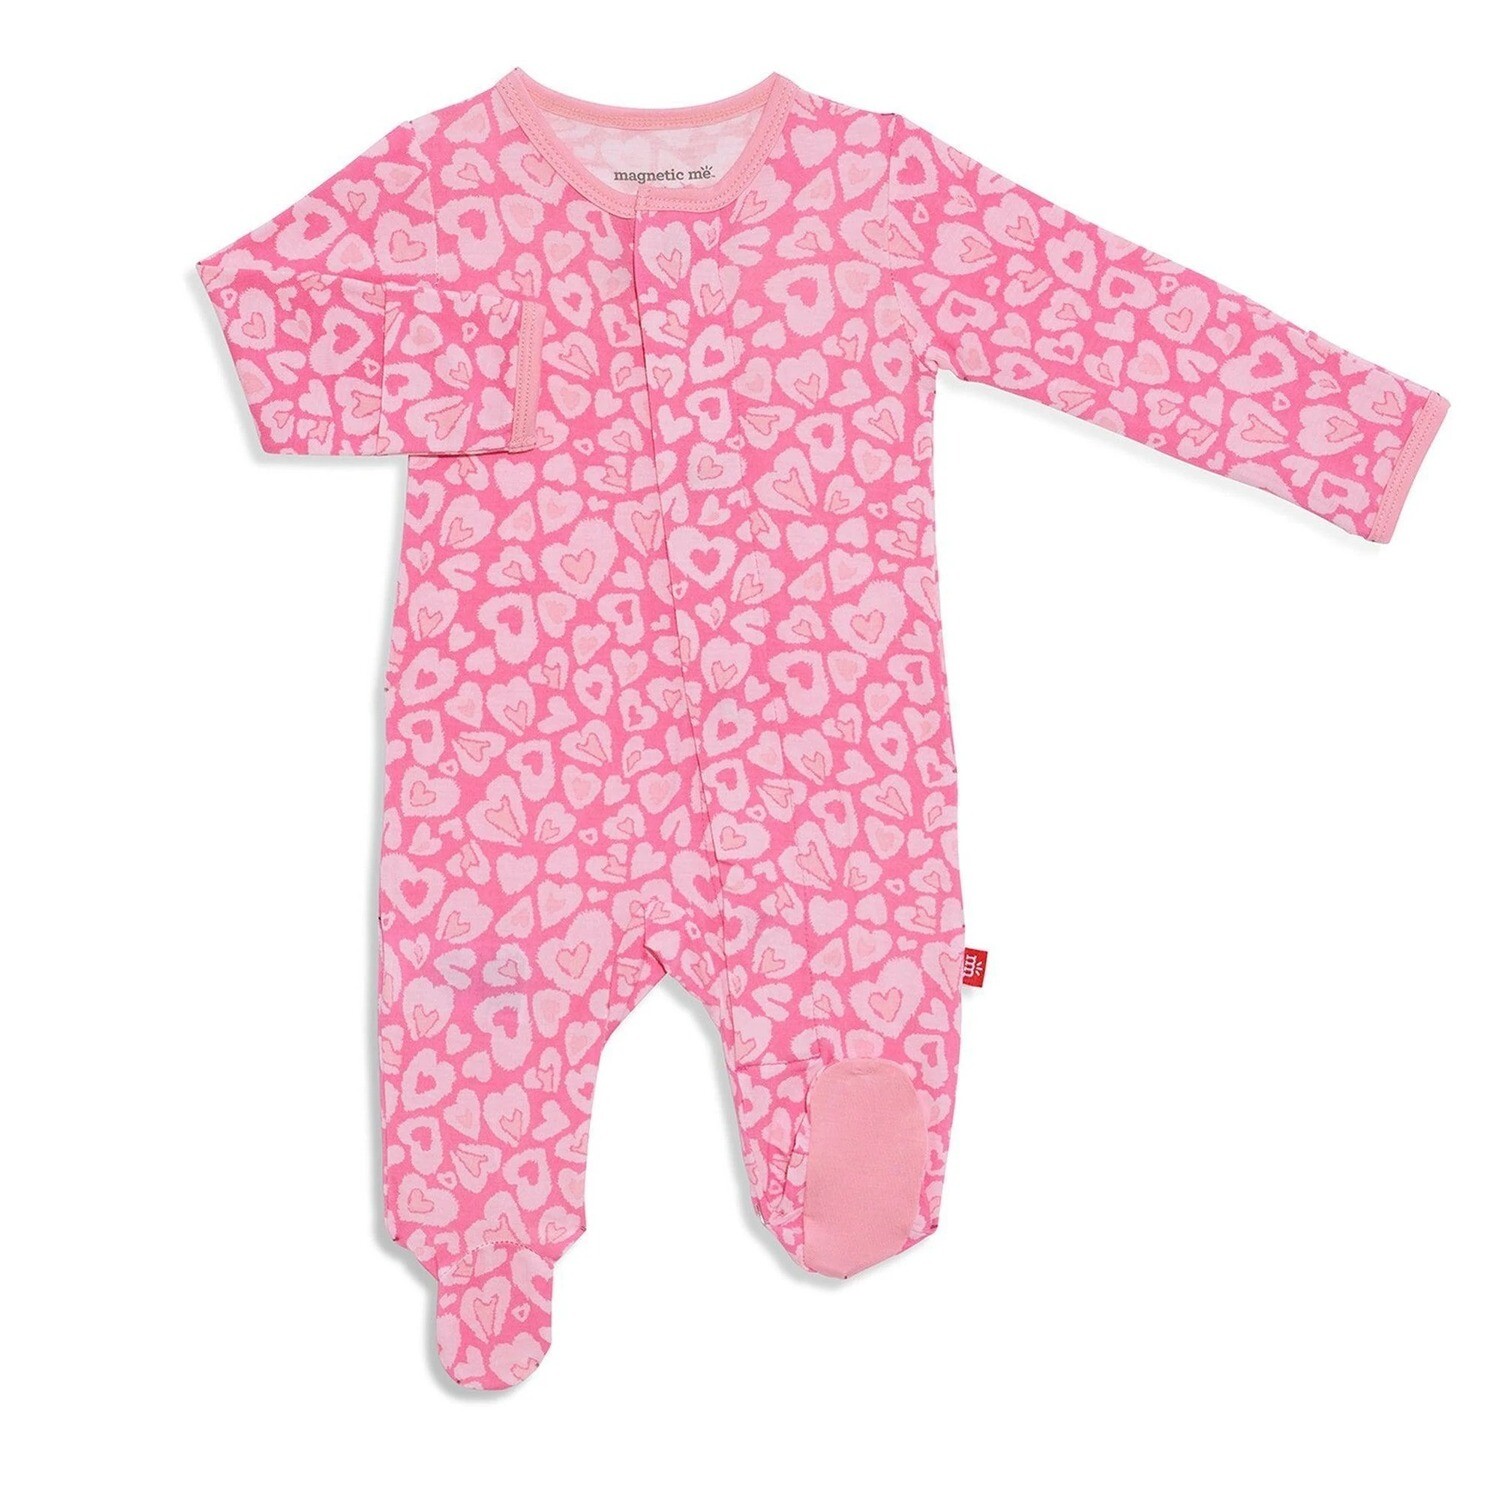 Magnetic Me Footie - Leophearts 6-9 Mo.